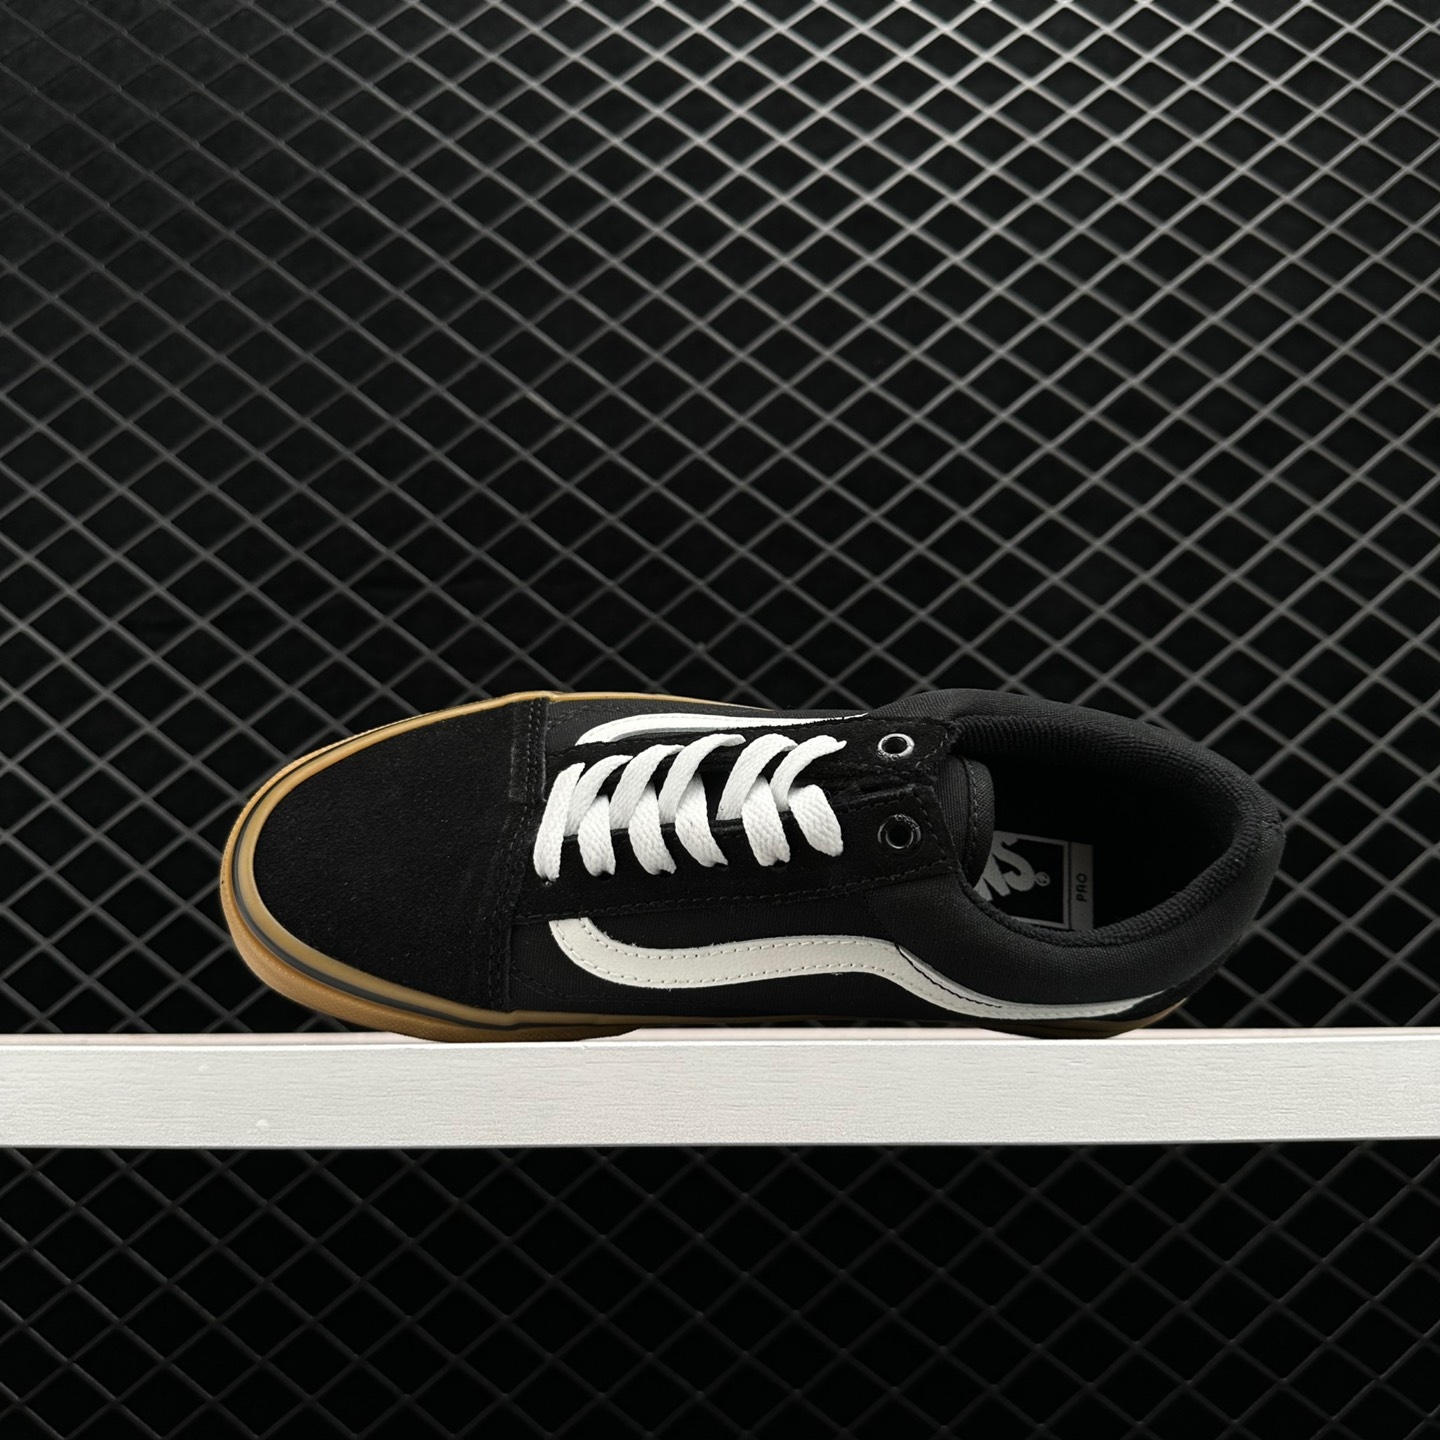 Vans Old Skool Pro Black: Classic Style with Modern Performance